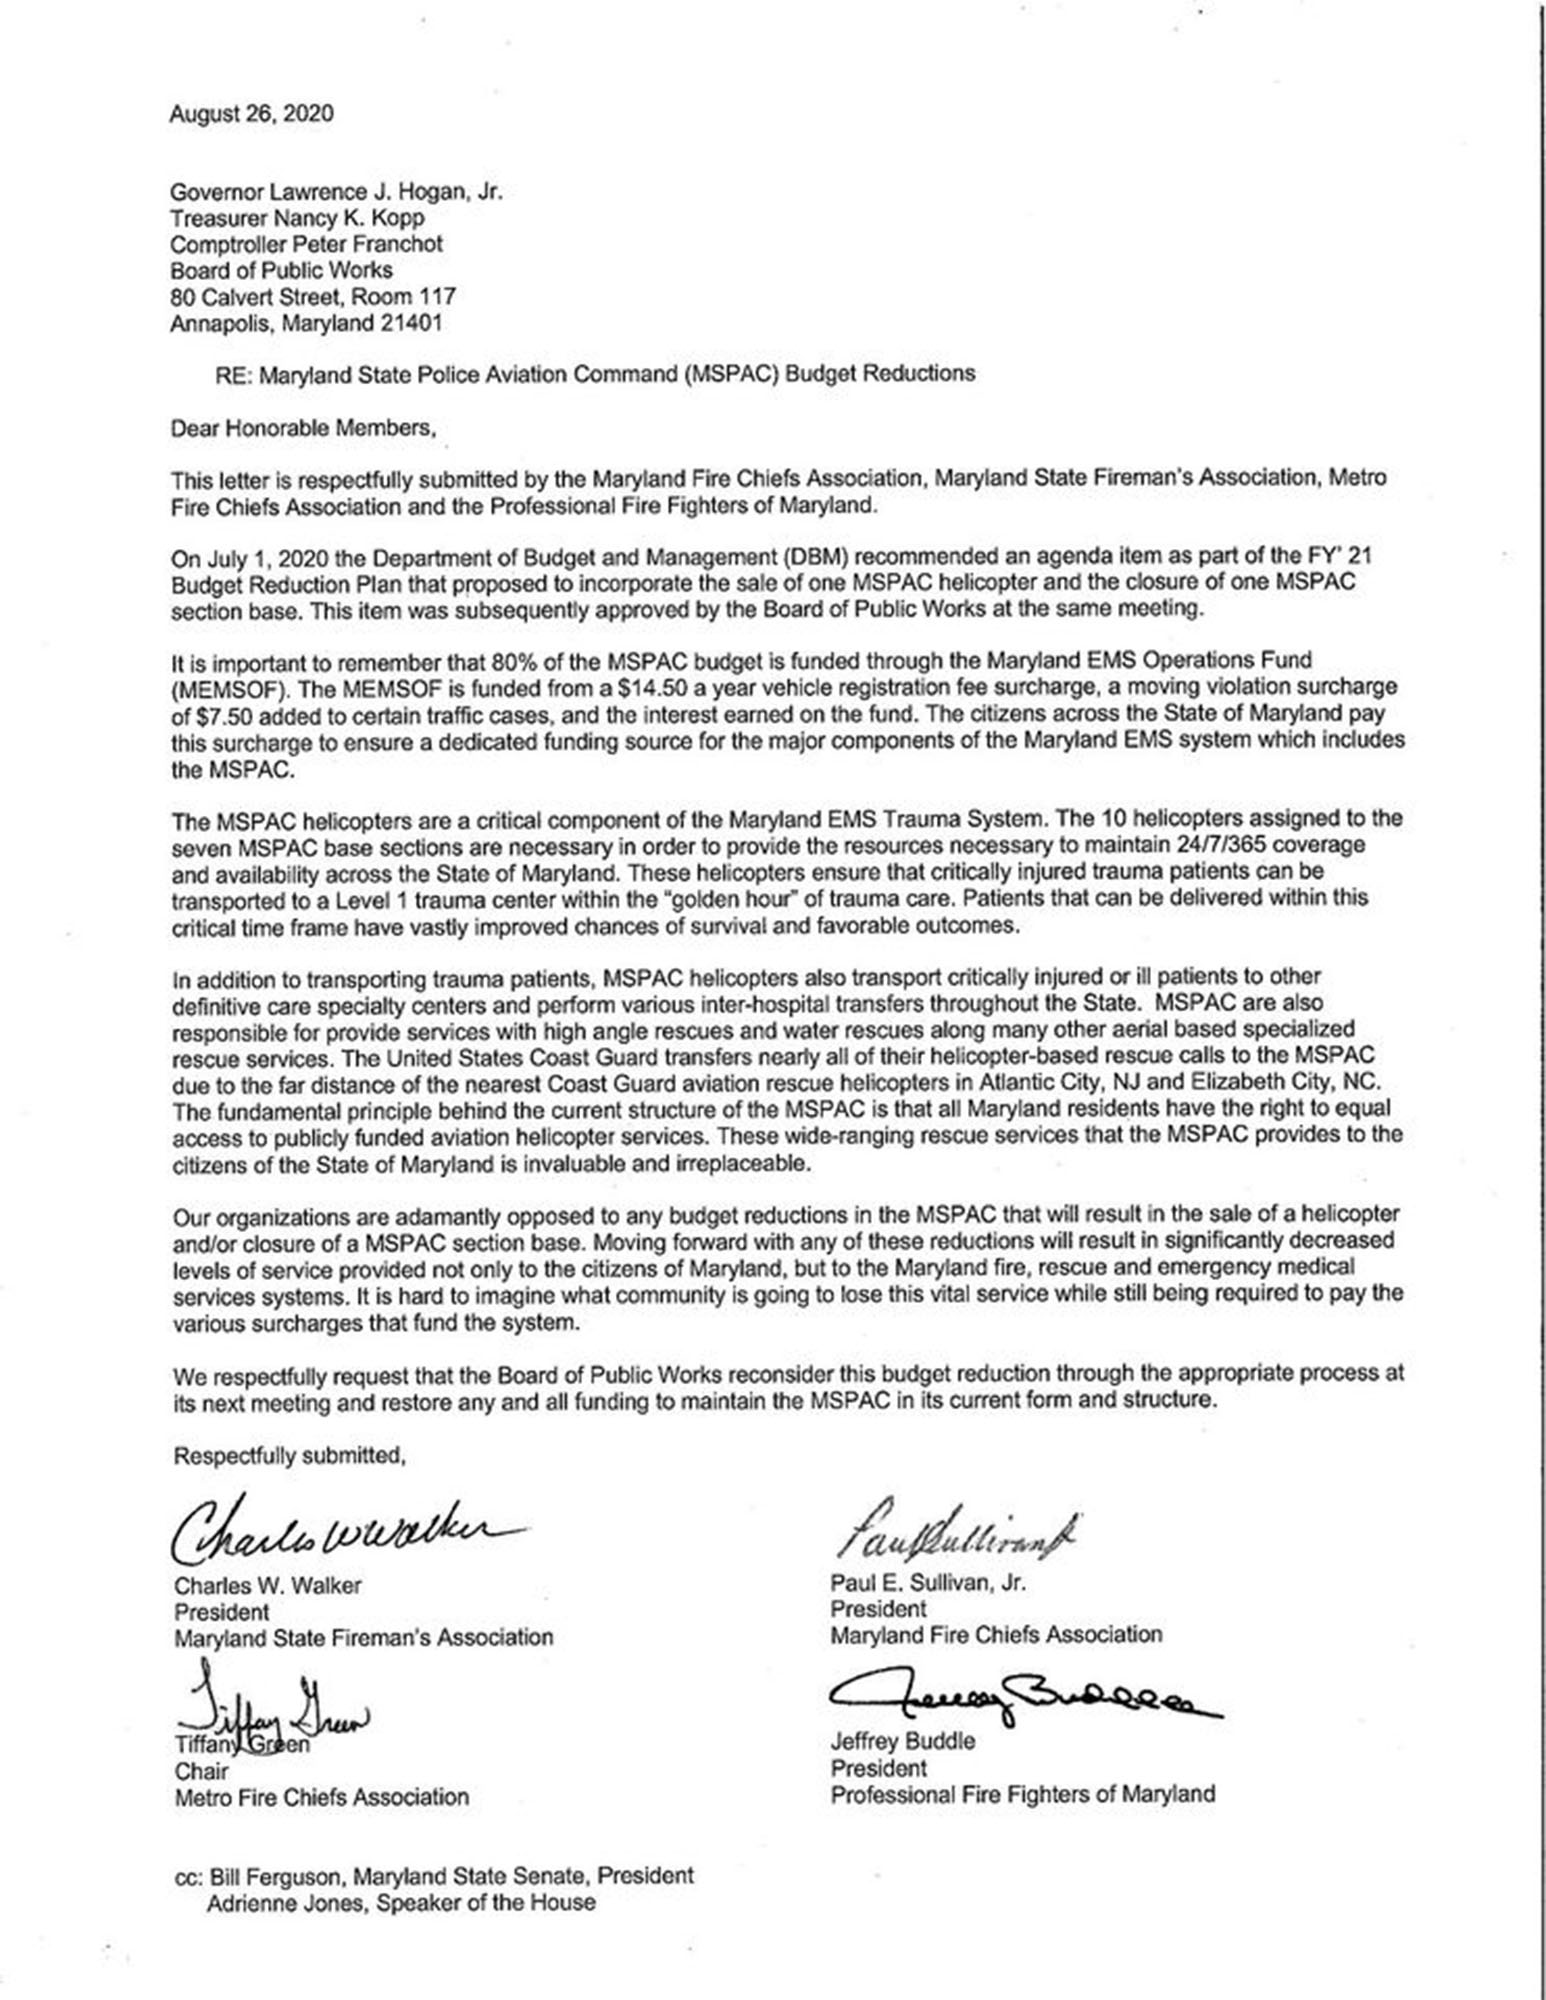 Joint Letter from the Maryland Fire Service to Governor Hogan regarding BOPW Budget Cuts